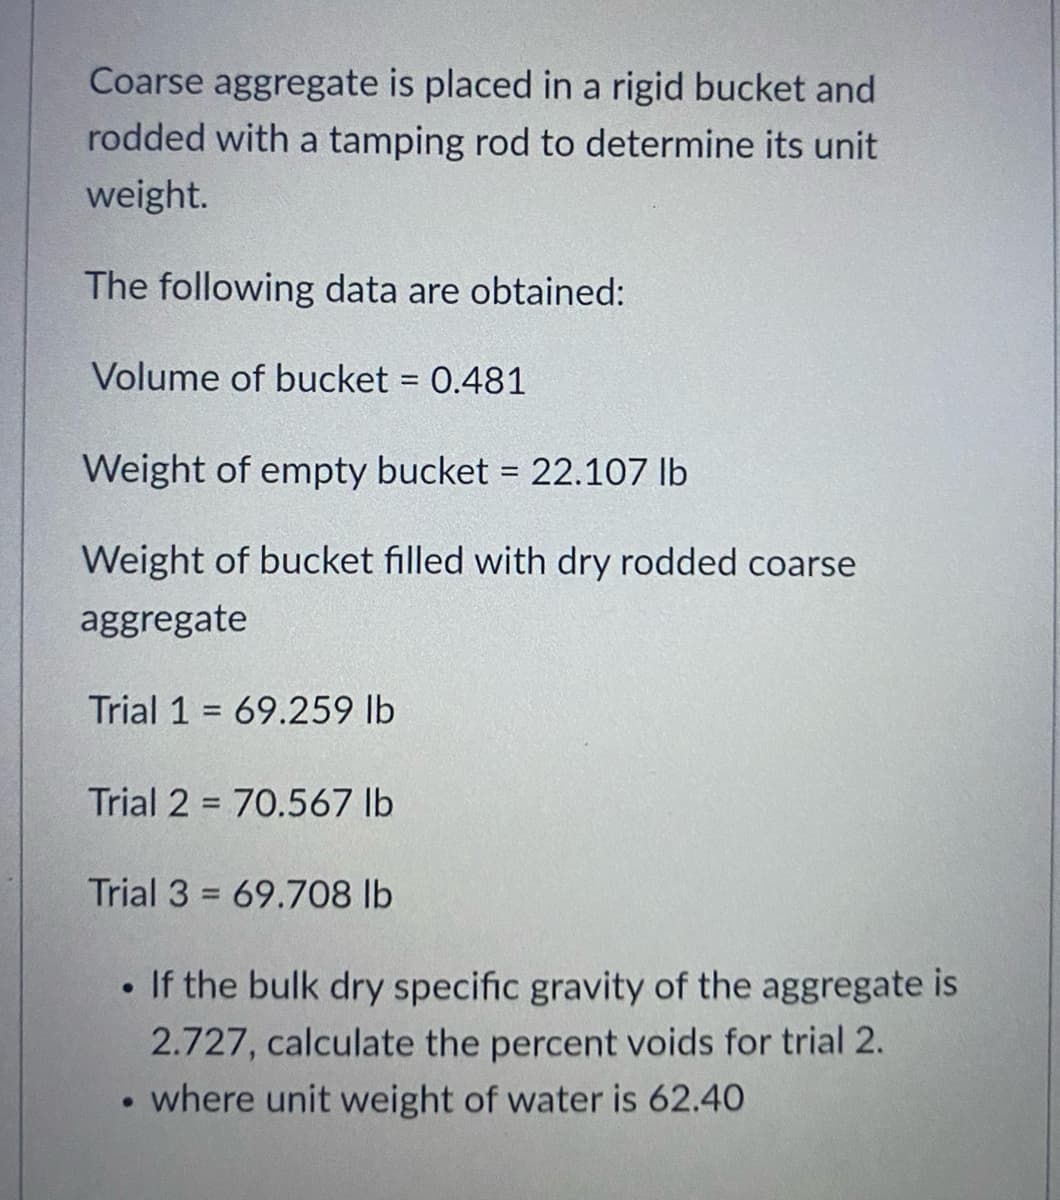 Coarse aggregate is placed in a rigid bucket and
rodded with a tamping rod to determine its unit
weight.
The following data are obtained:
Volume of bucket = 0.481
%3D
Weight of empty bucket = 22.107 Ib
%3!
Weight of bucket filled with dry rodded coarse
aggregate
Trial 1 = 69.259 lb
%3D
Trial 2 = 70.567 lb
Trial 3 = 69.708 lb
• If the bulk dry specific gravity of the aggregate is
2.727, calculate the percent voids for trial 2.
where unit weight of water is 62.40
